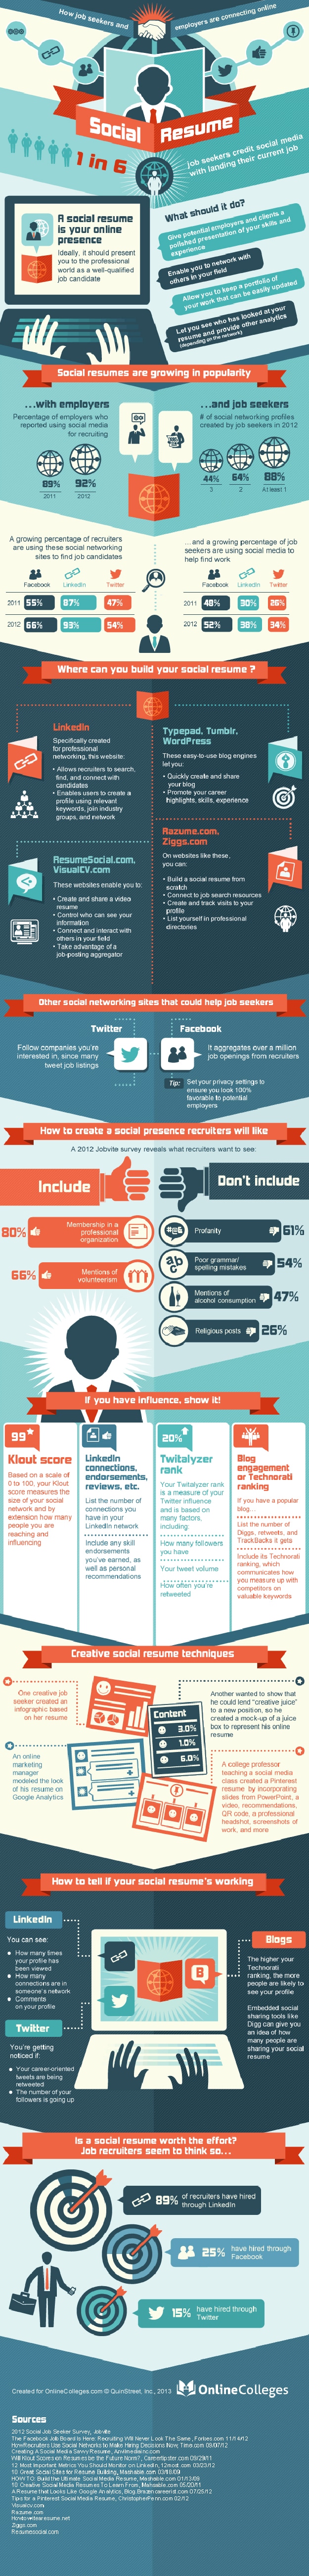 create-a-social-resume-infographic